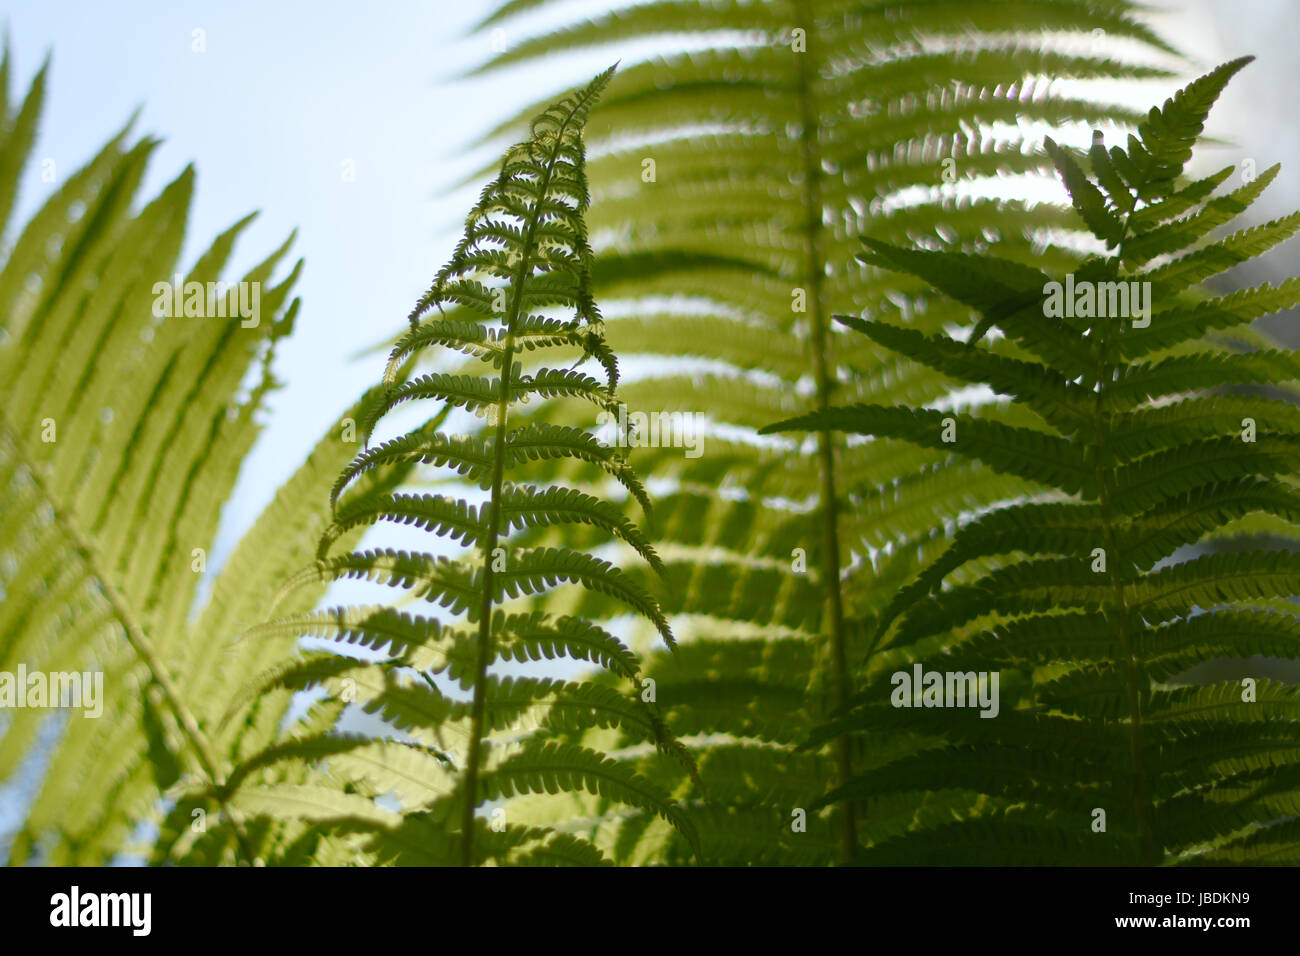 Blurry, abstract background with a delicate fern motif. Dense, lush, green vegetation in the garden. The dominant color of Greenery. Stock Photo